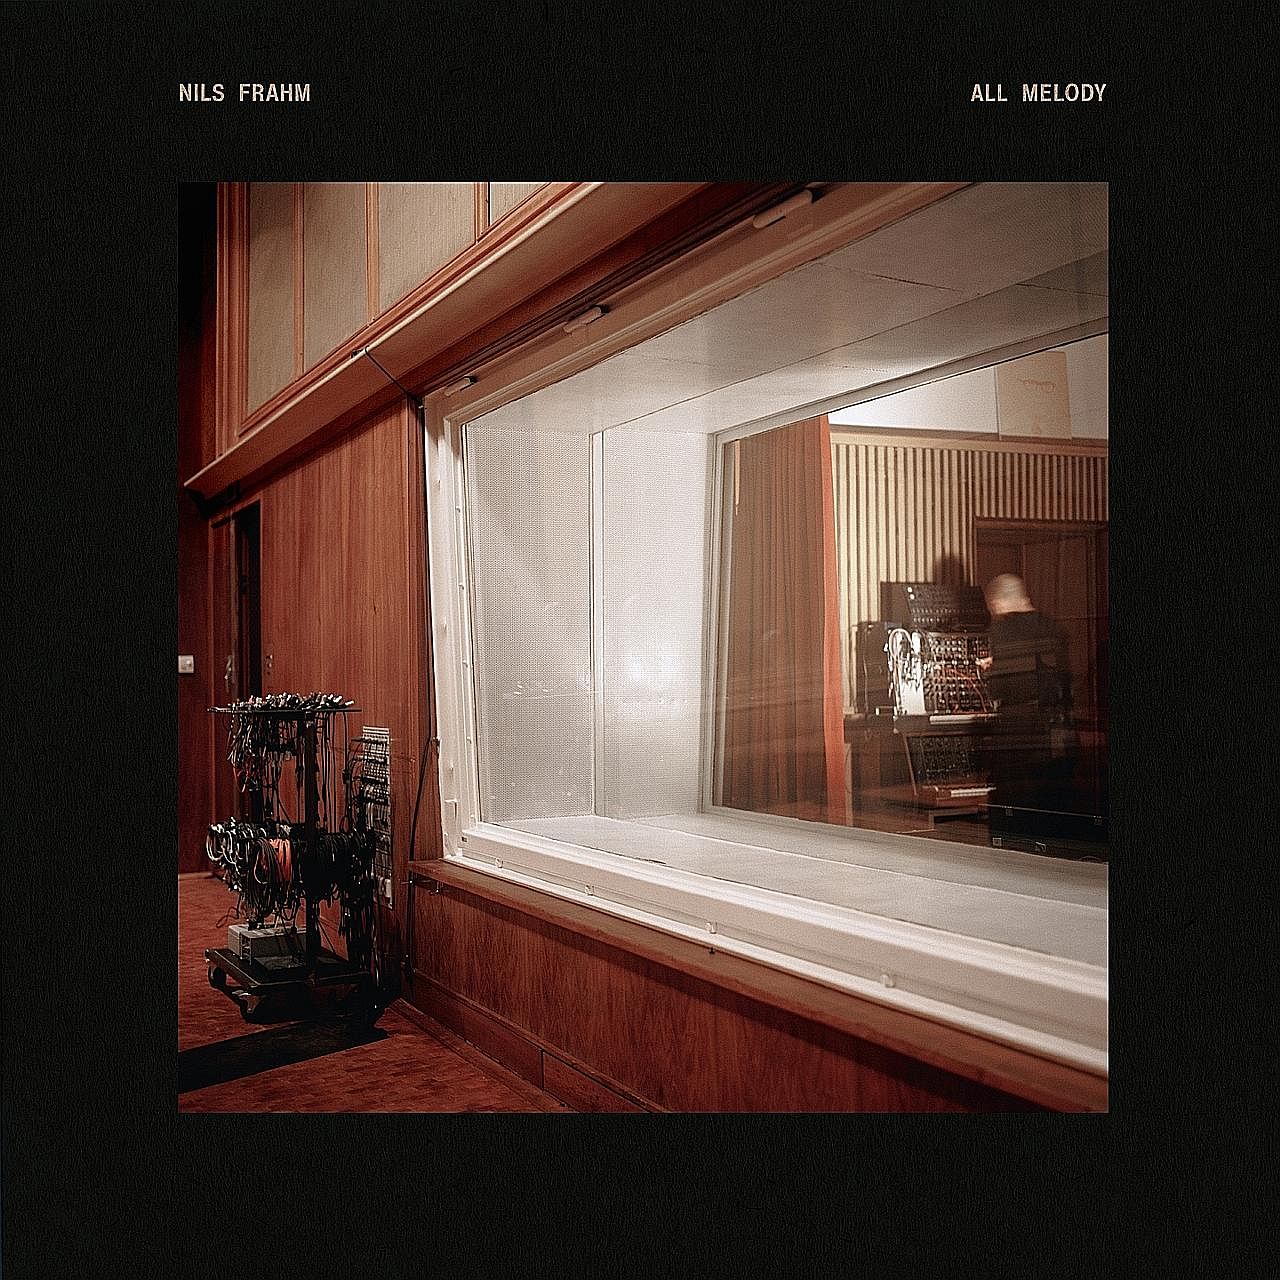 Nils Frahm spent two years recording All Melody in the Saal 3 studio in Berlin.